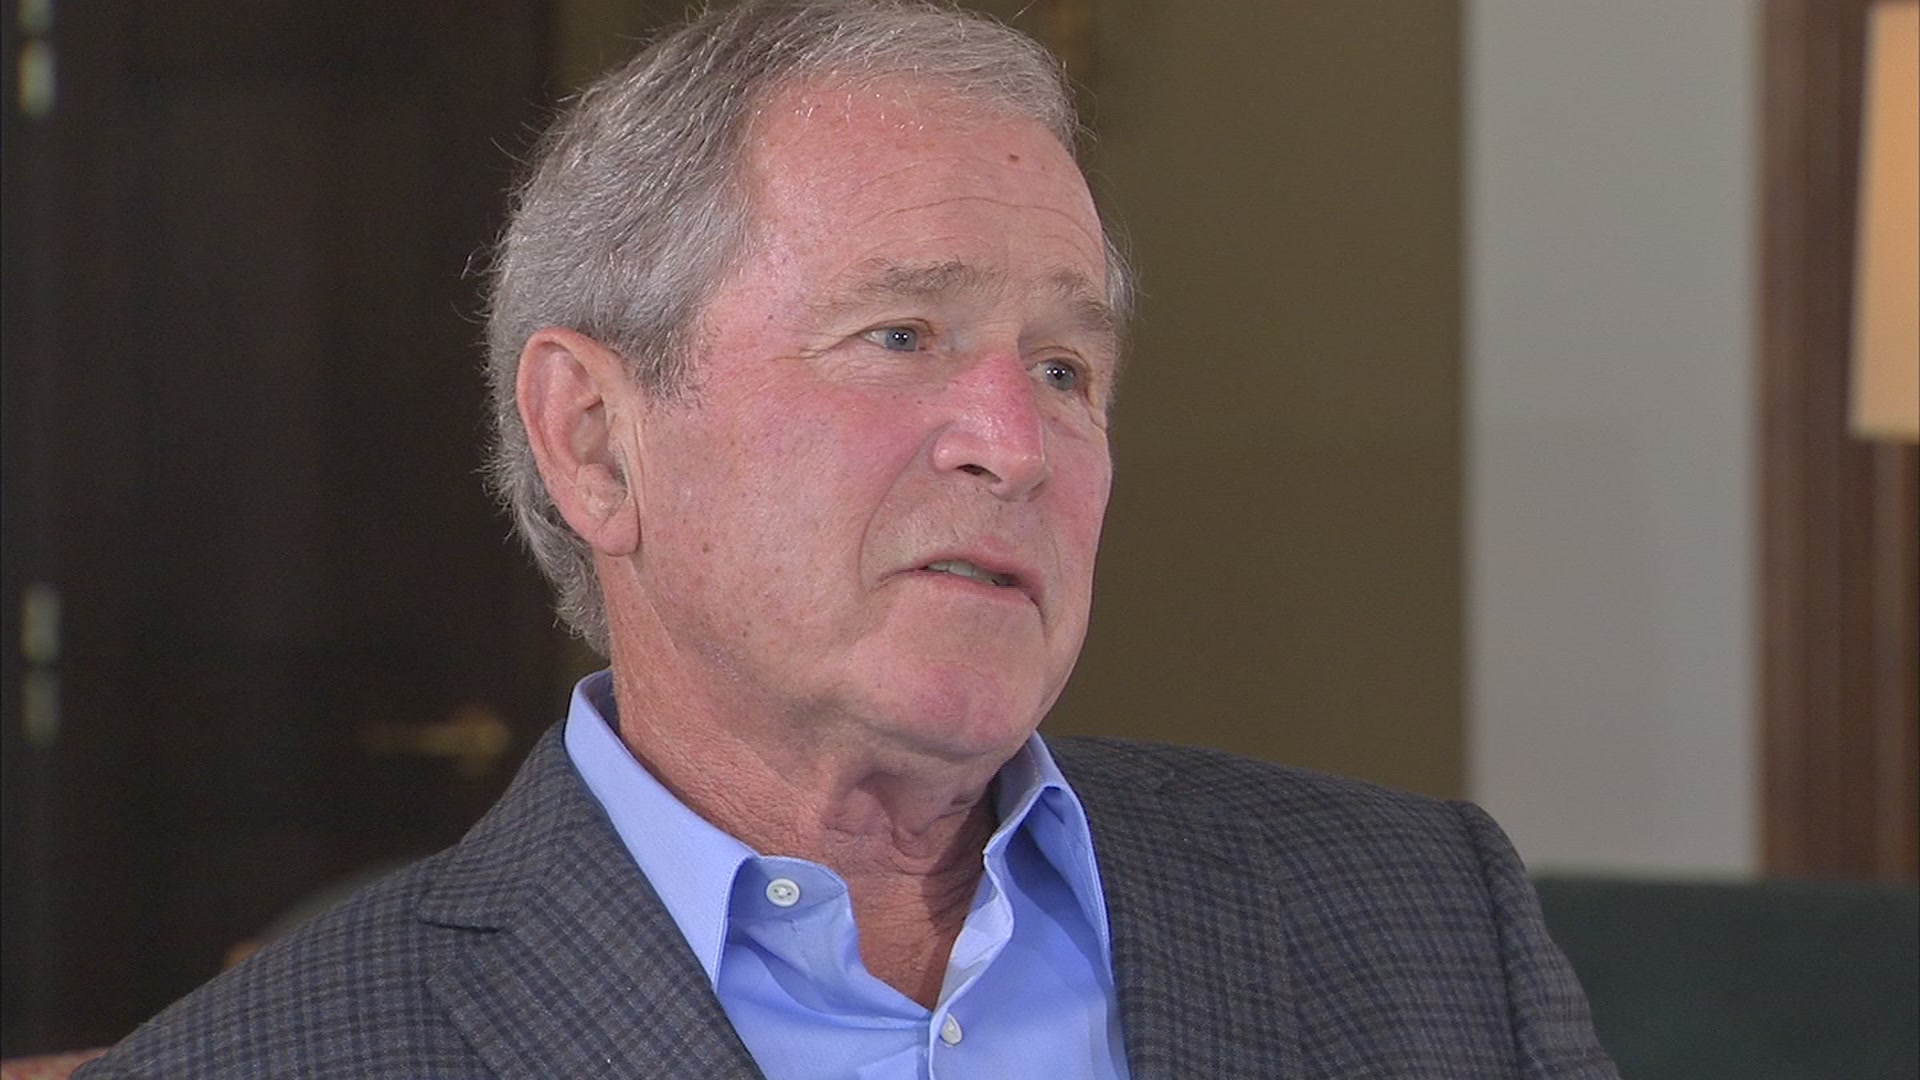 George W. Bush, Laura Bush To Be Honored for Work With Vets